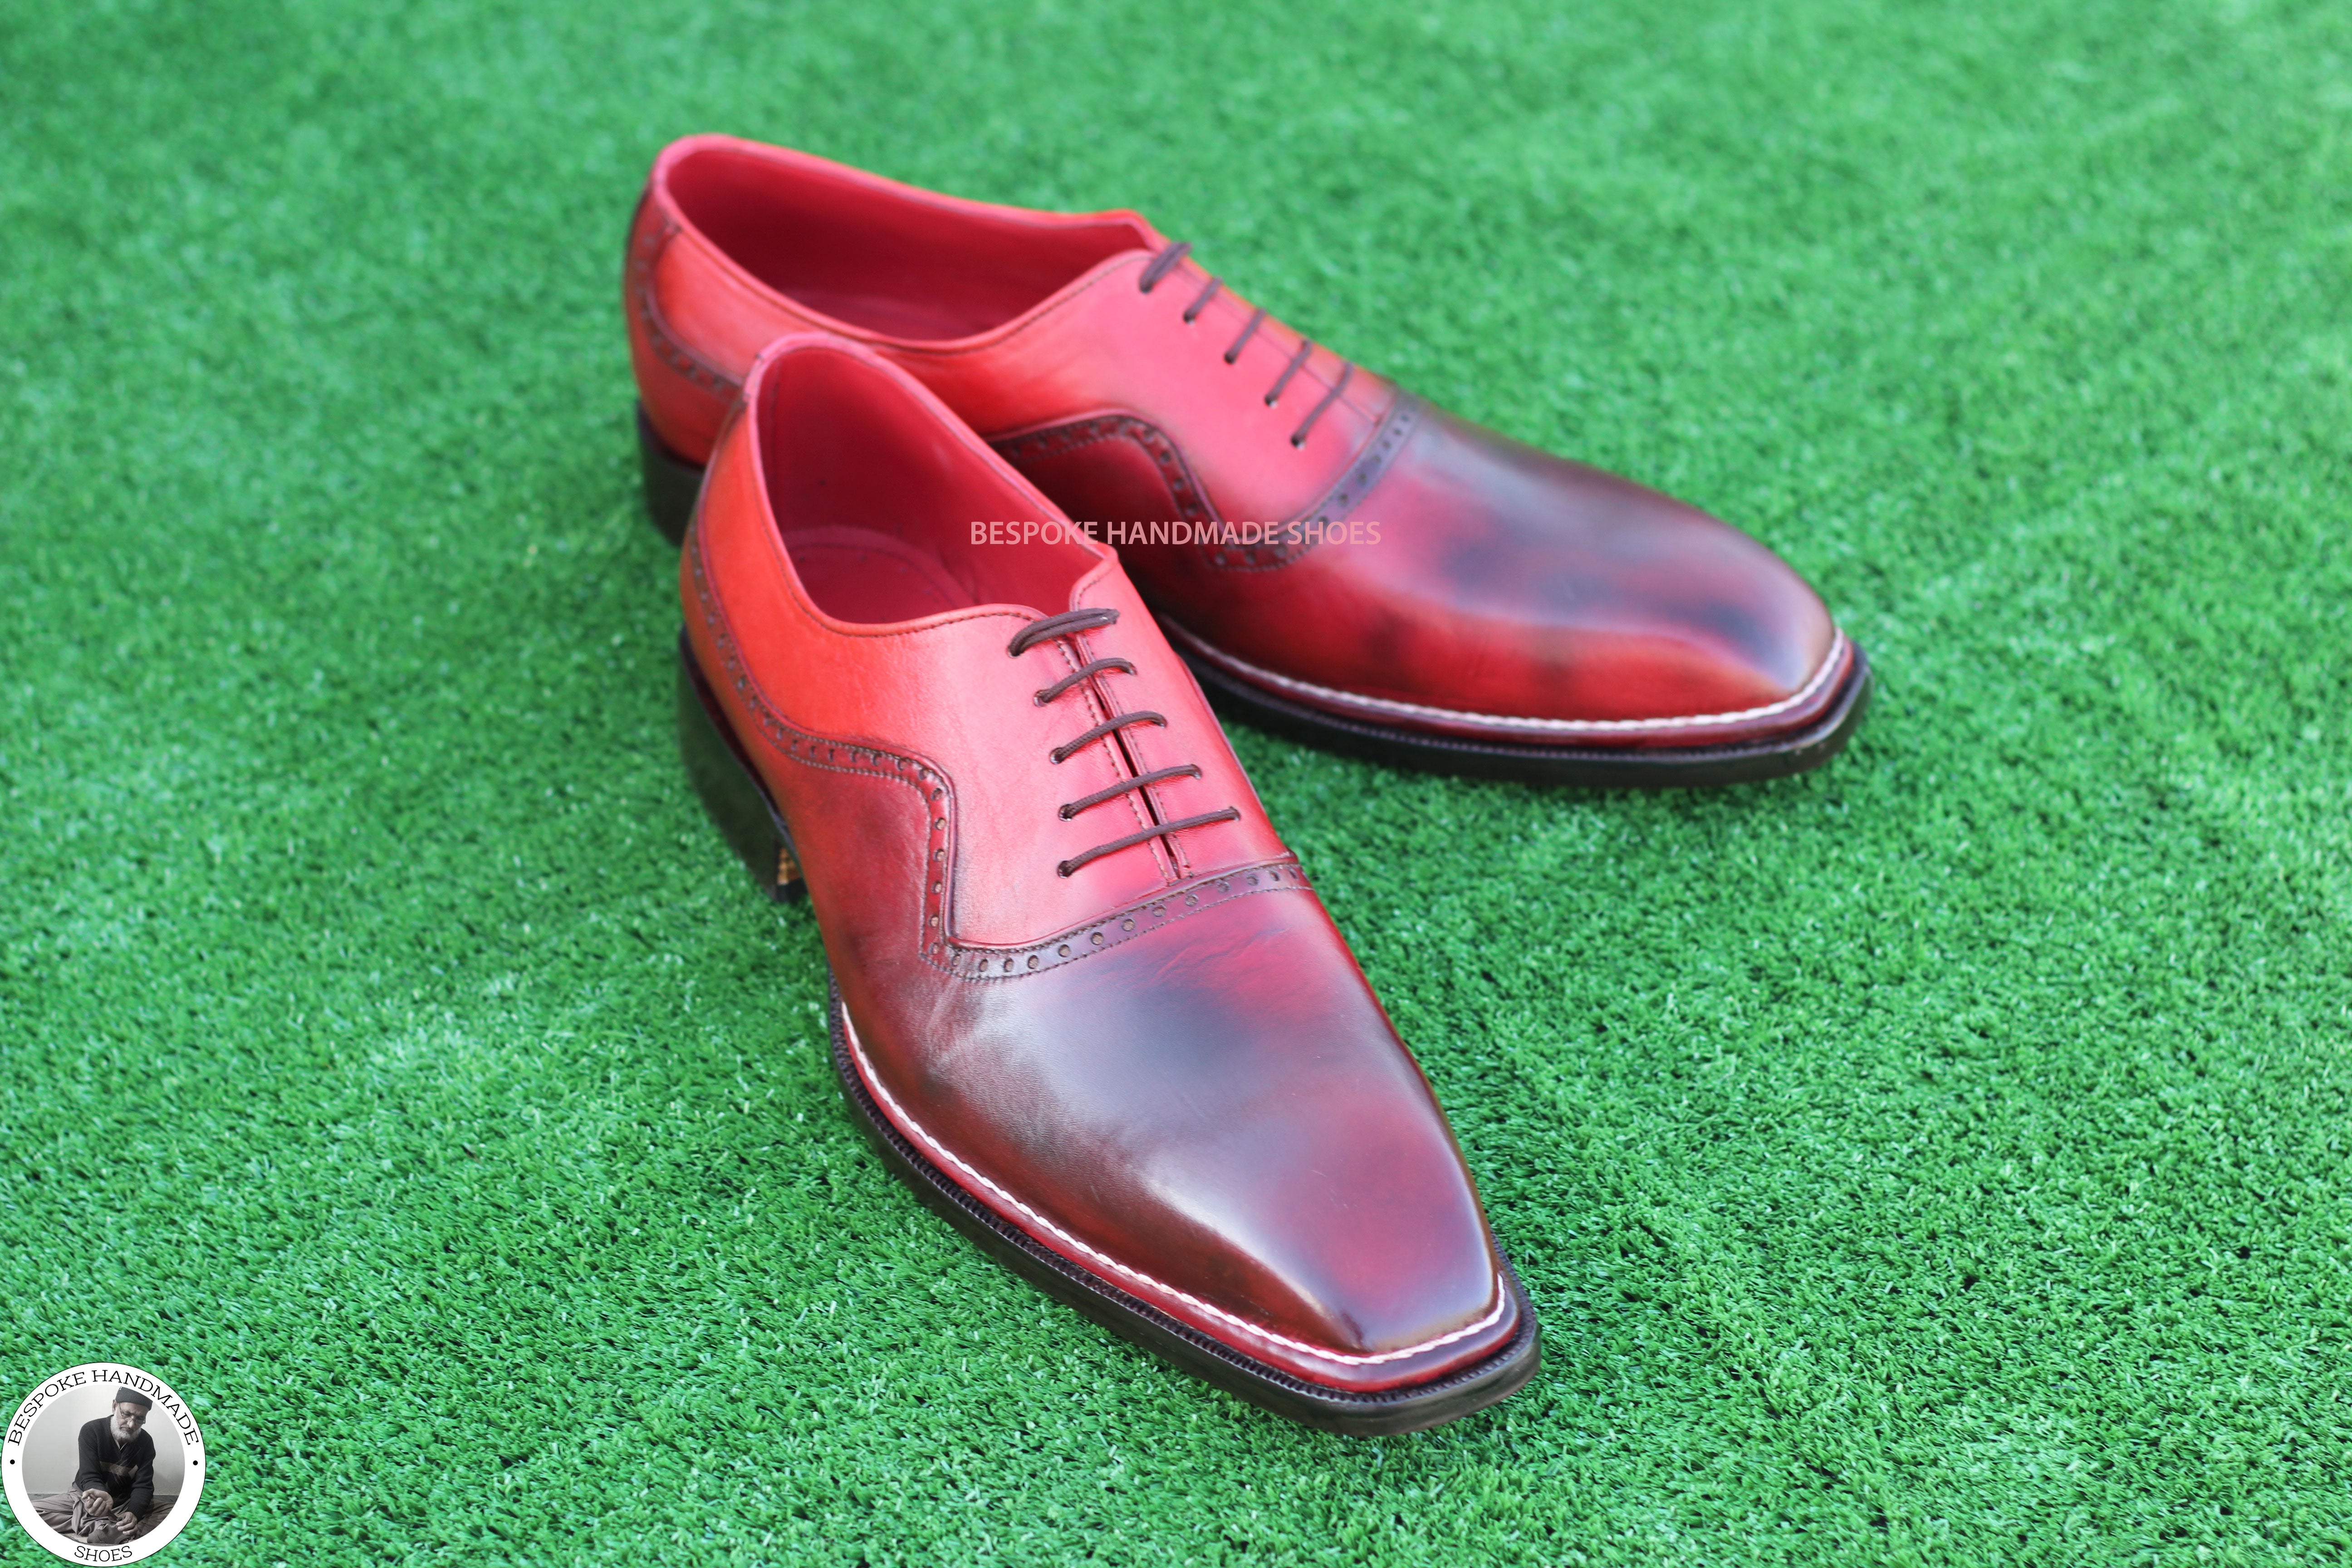 Bespoke Handmade Men's Maroon Leather Oxford Whole Cut Lace up White Stitching Dress Casual Shoes